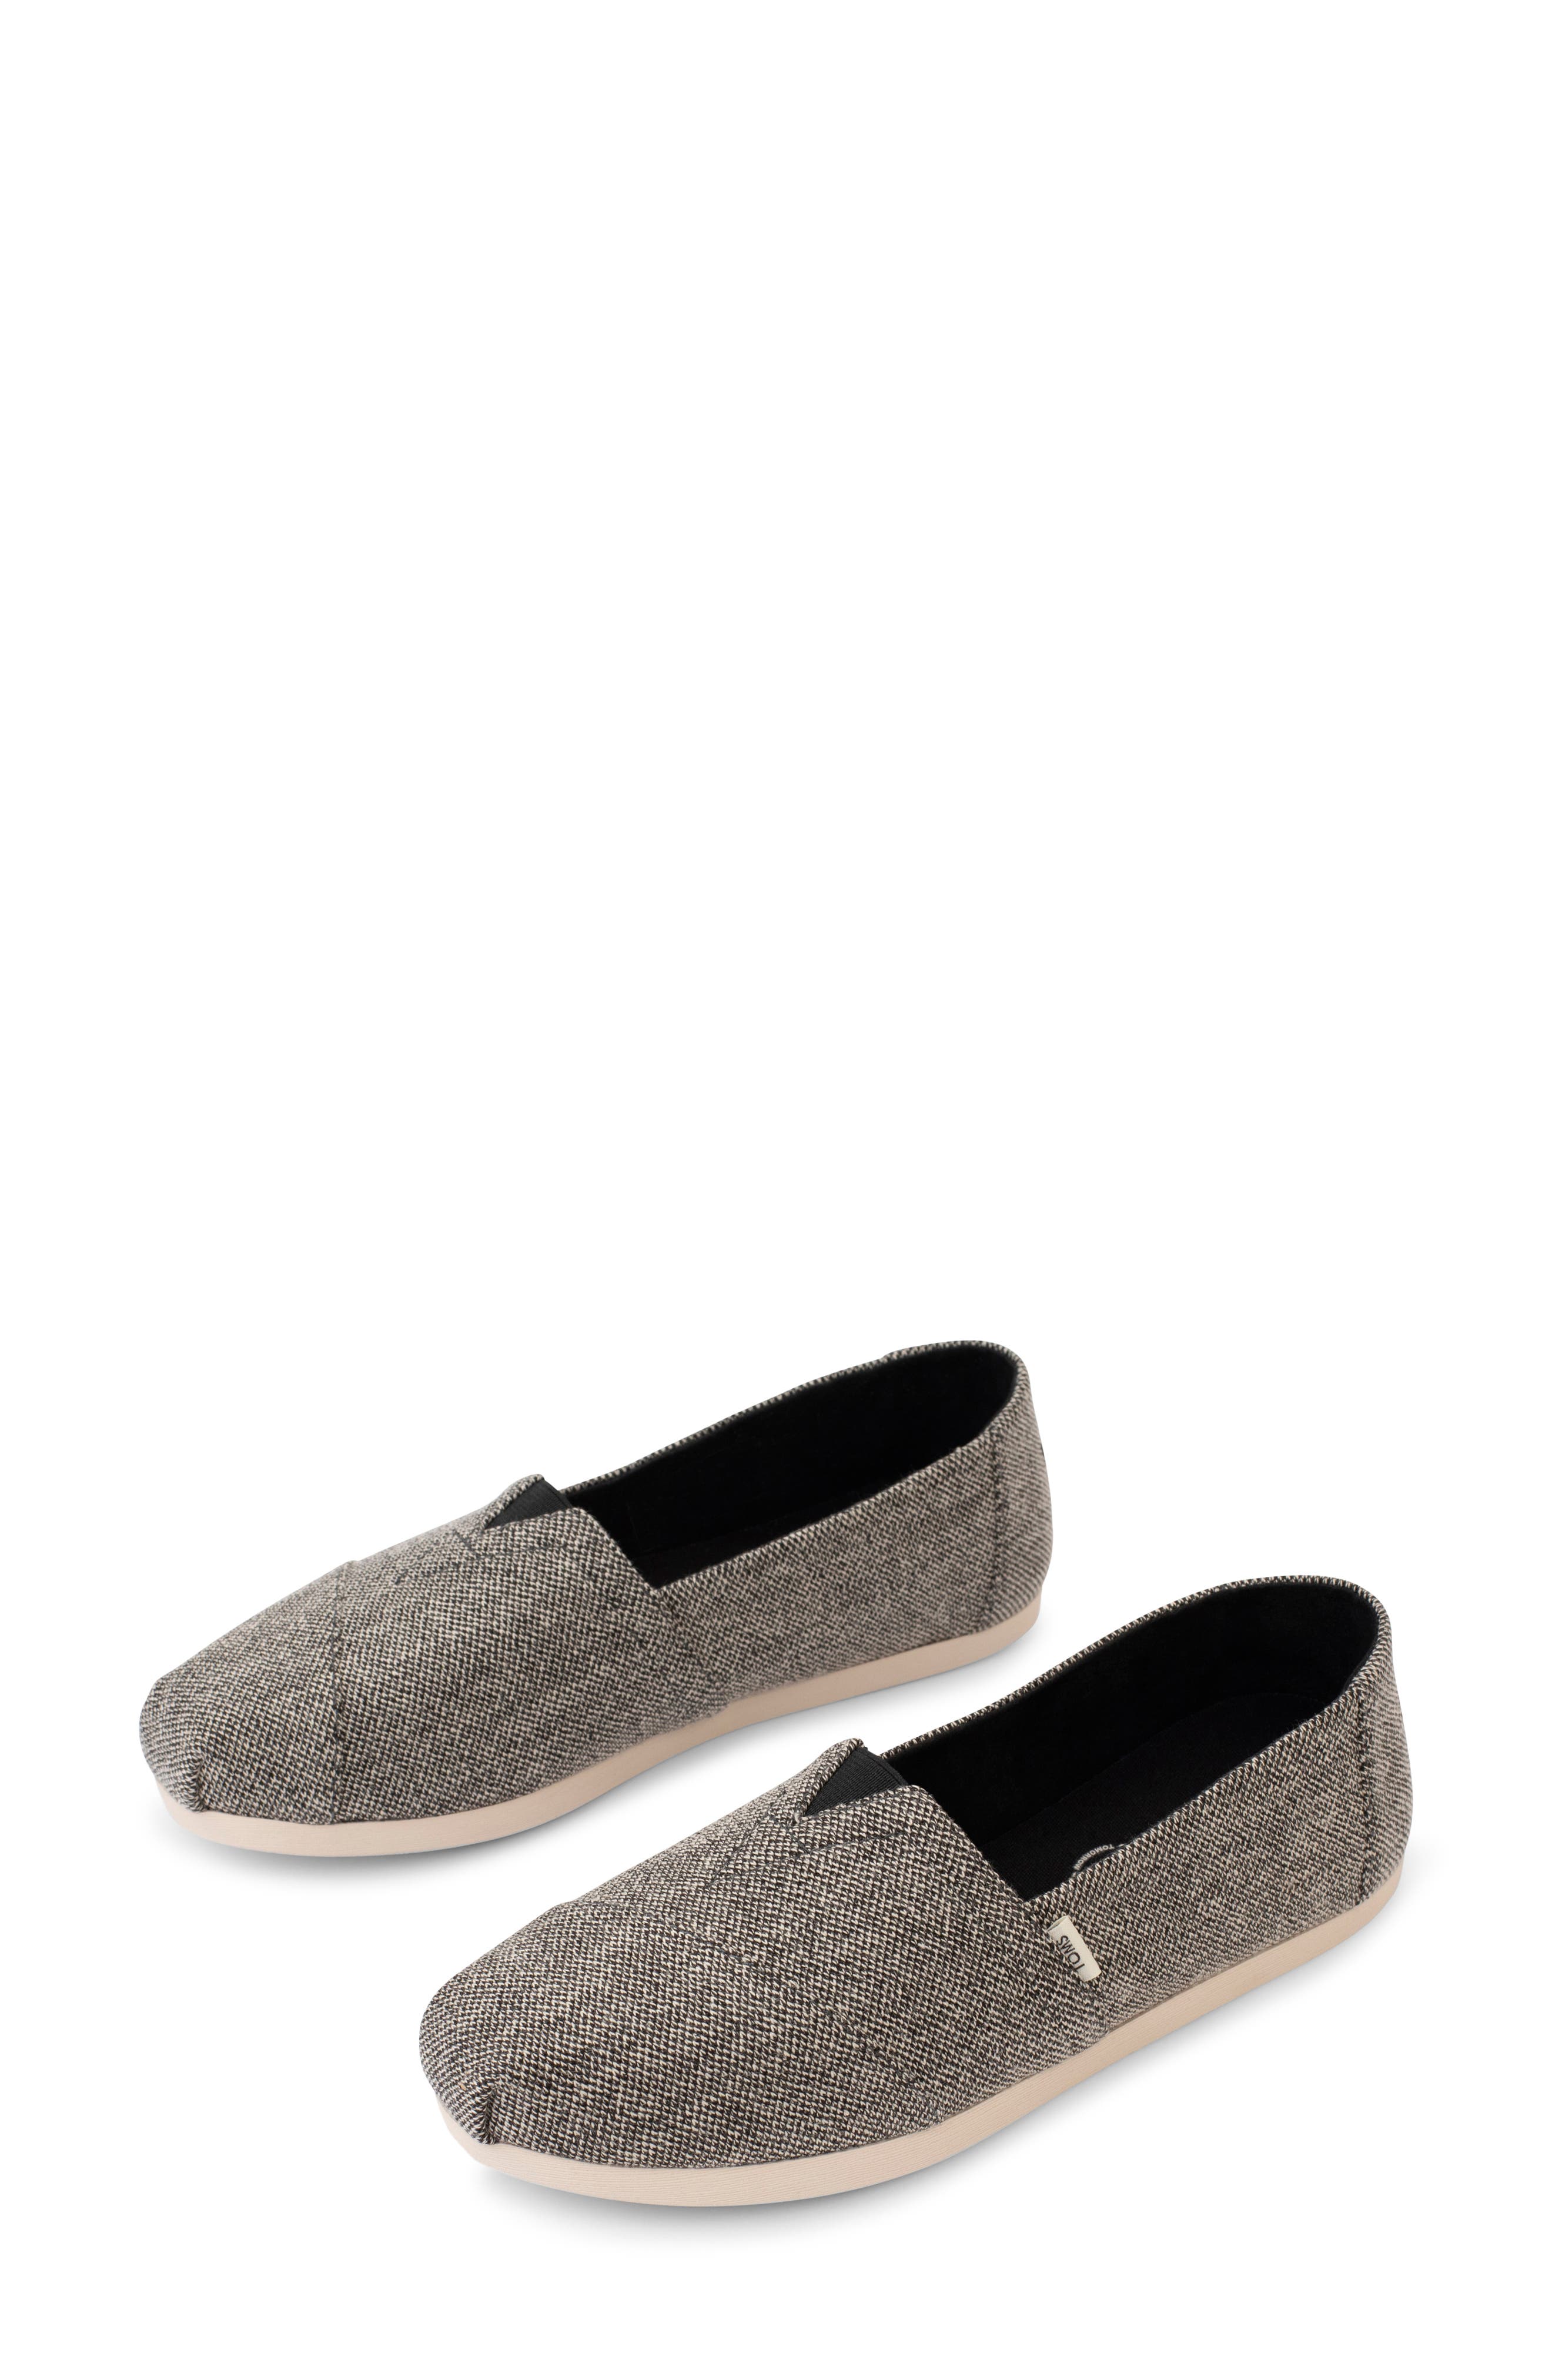 toms womens shoes loafers